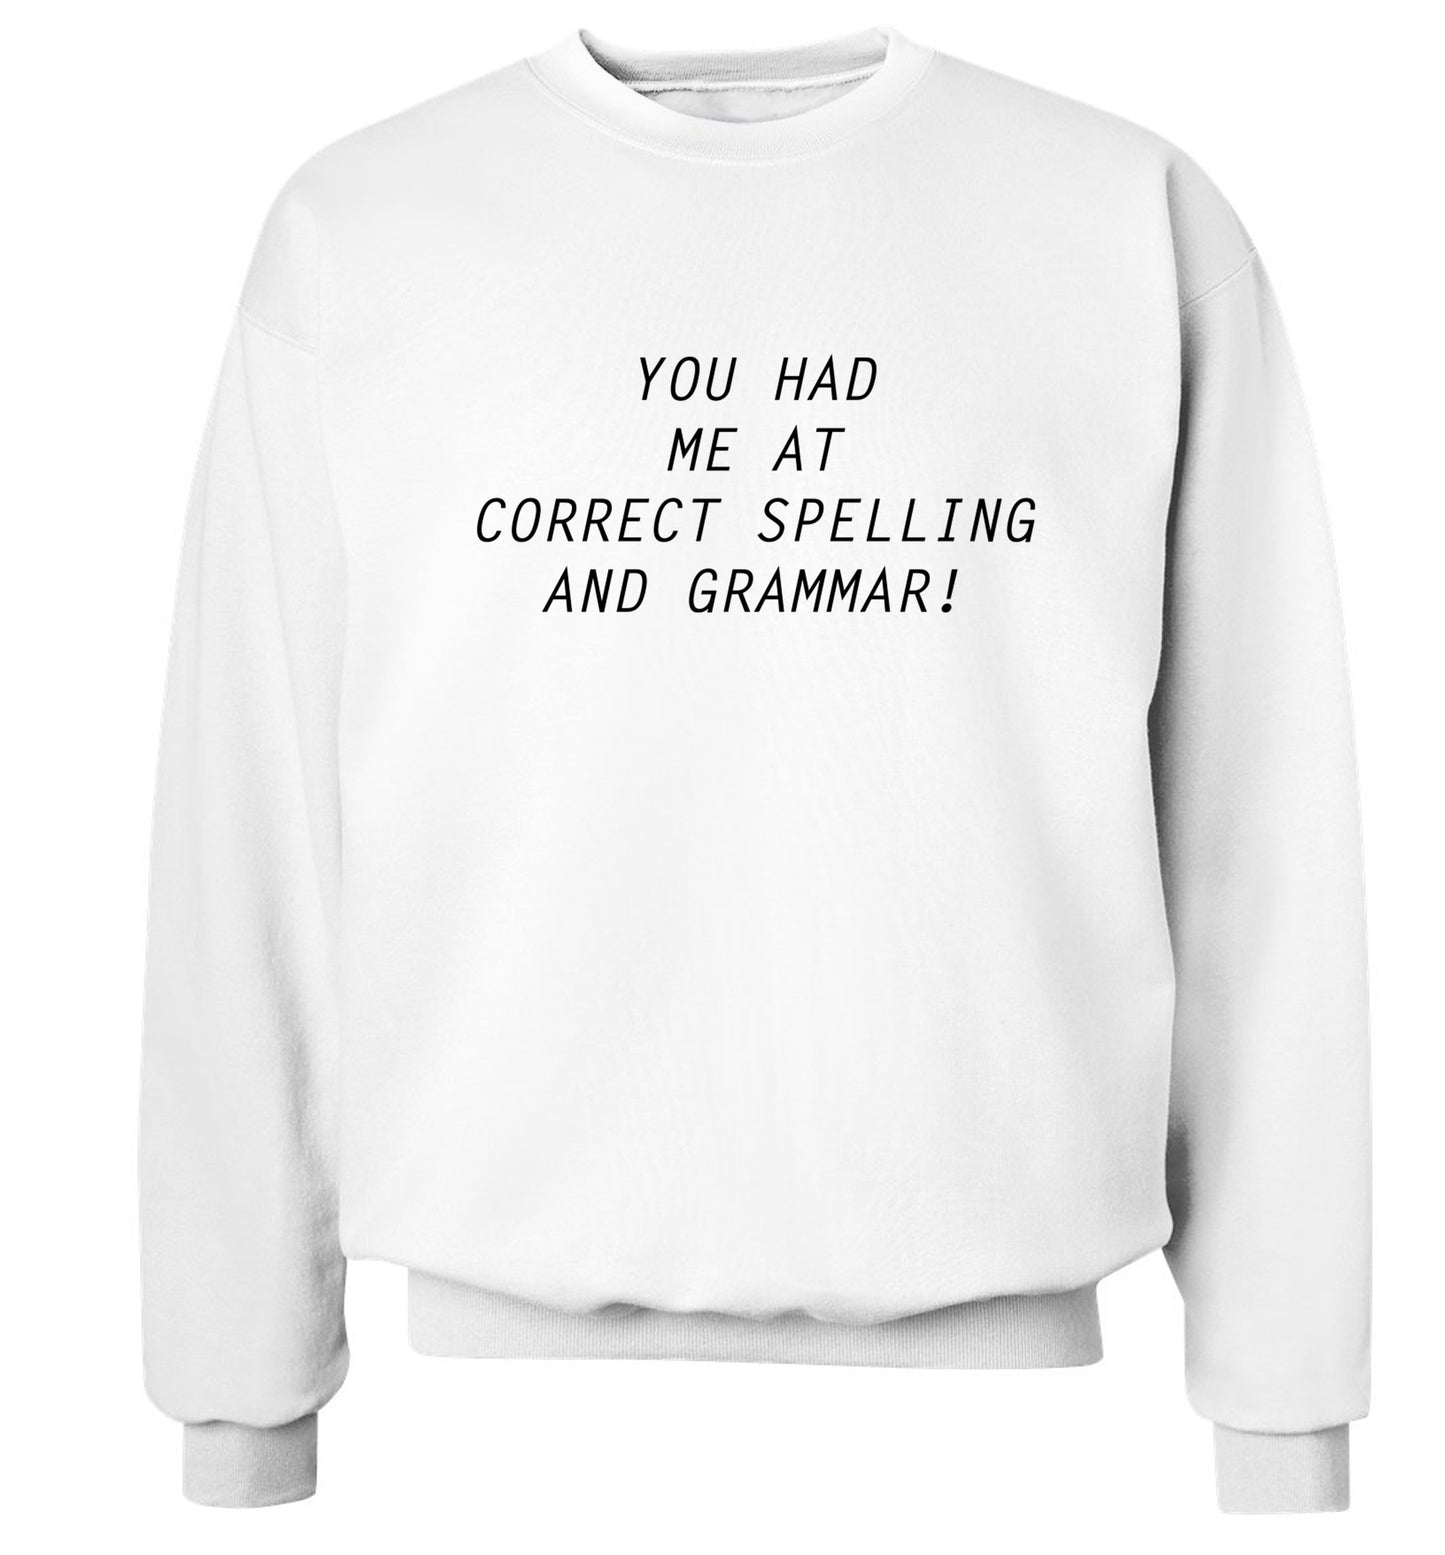 You had me at correct spelling and grammar Adult's unisex white Sweater 2XL